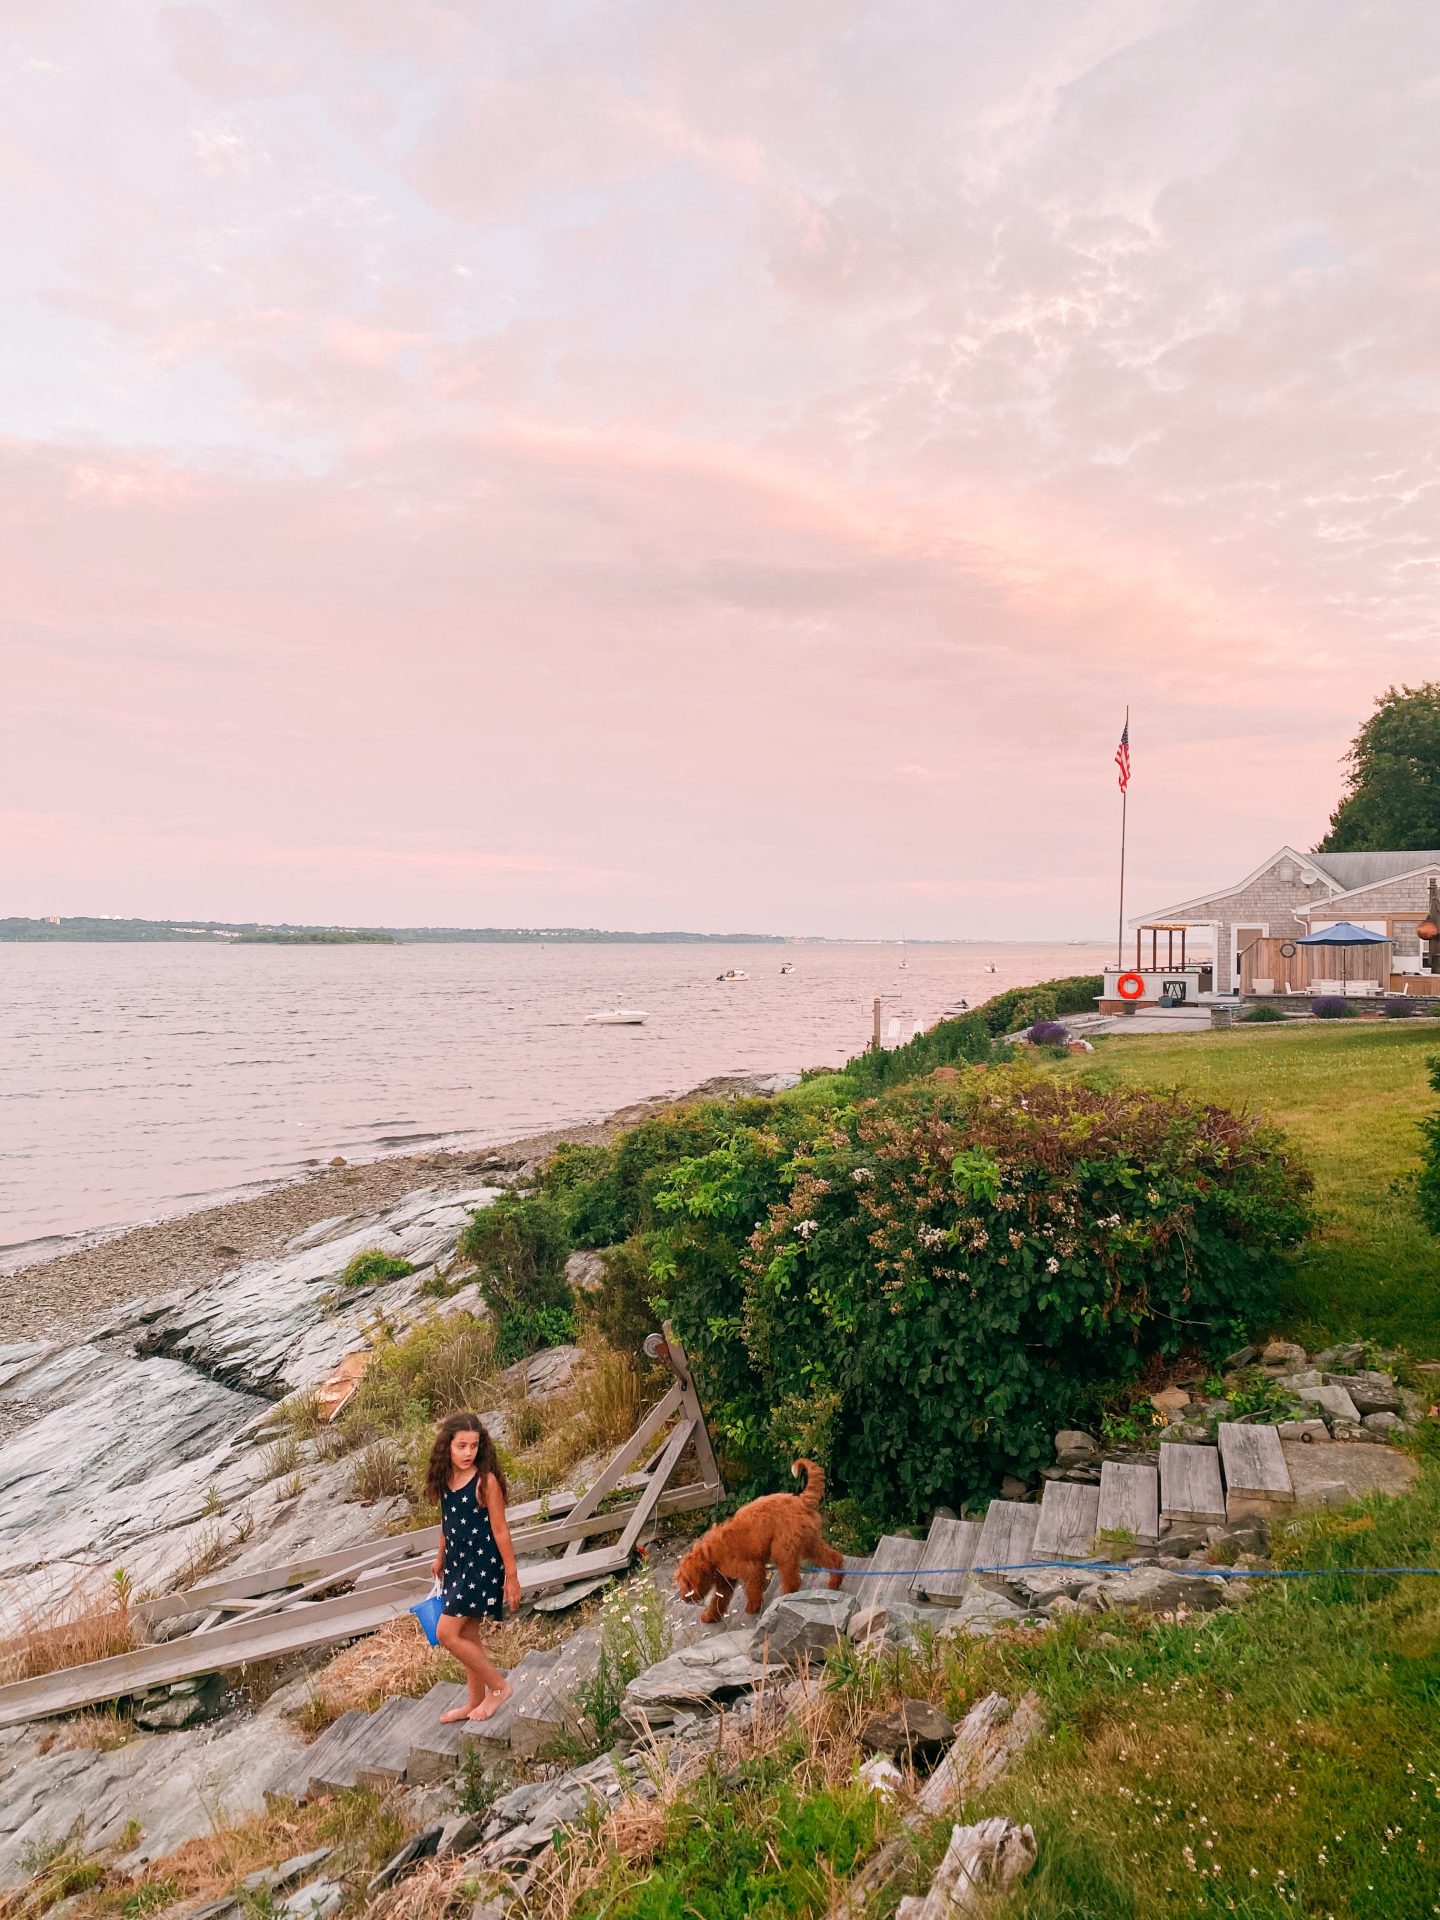 Visit Prudence Island, Rhode Island a Travel Guide to this special island!